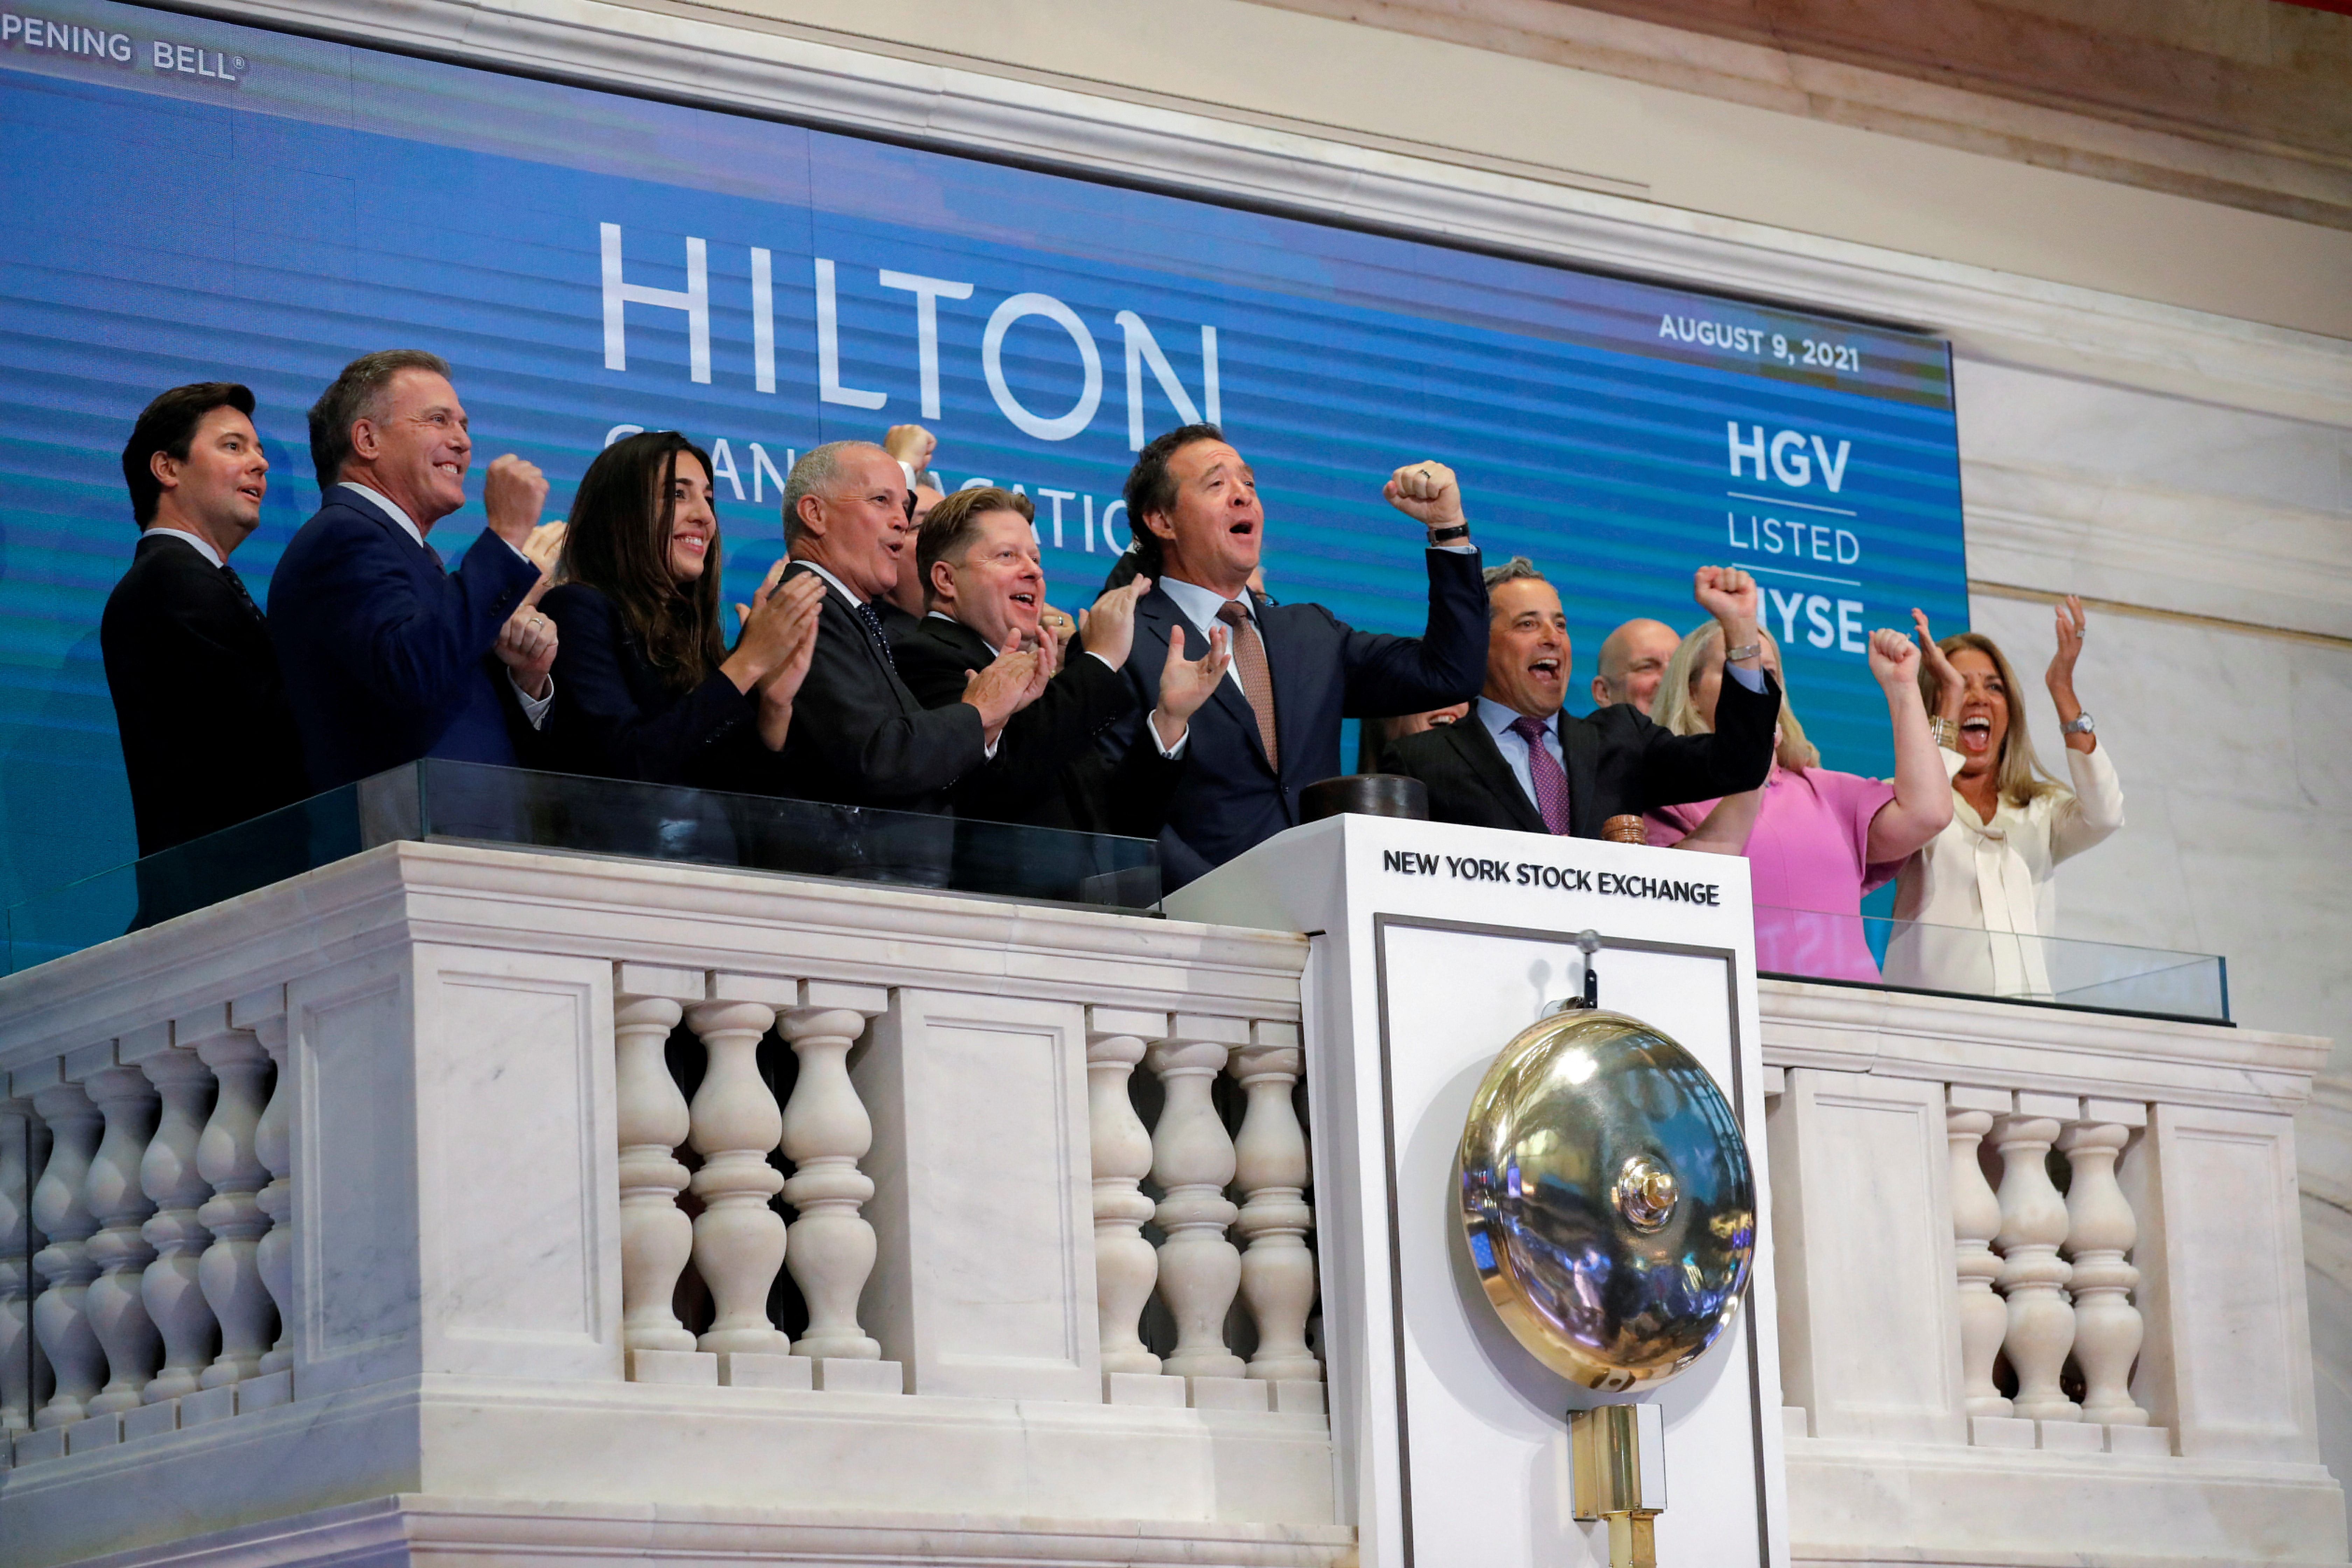 Mark Wang, President and CEO of Hilton Grand Vacations rings the opening bell at the New York Stock Exchange (NYSE) in Manhattan, New York City